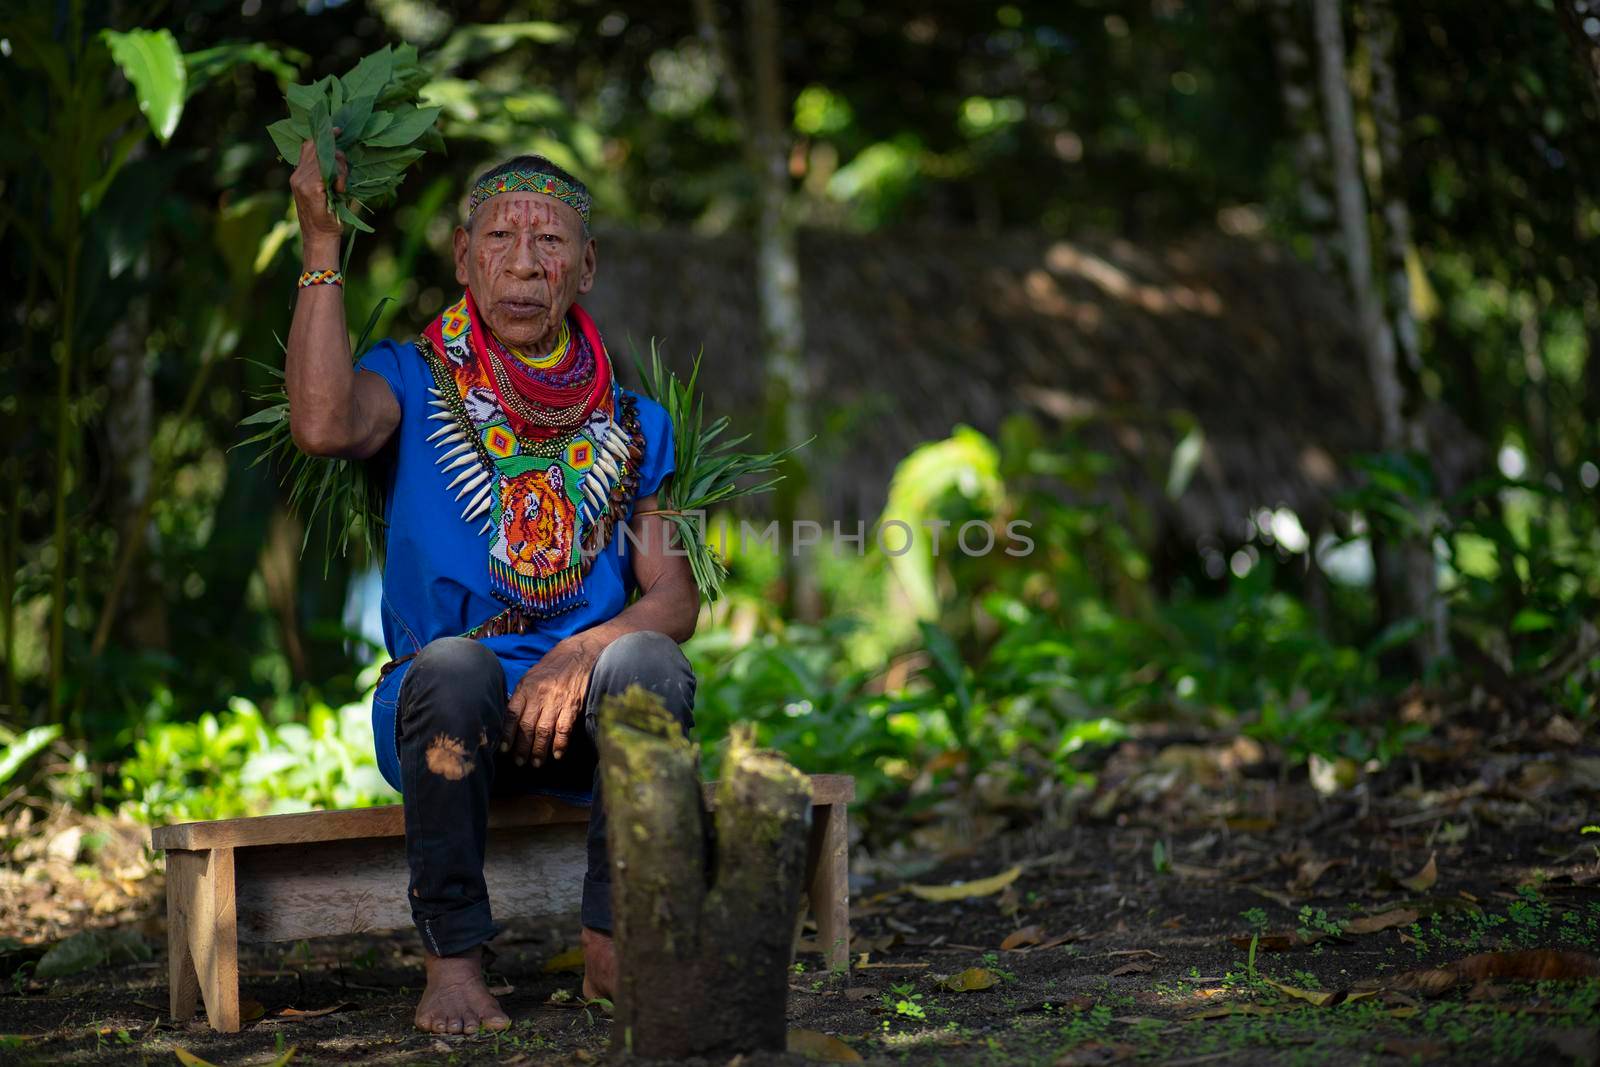 Old shaman of the Cofan nationality sitting on a small wooden bench performing a healing ritual in the middle of the Amazon jungle by alejomiranda